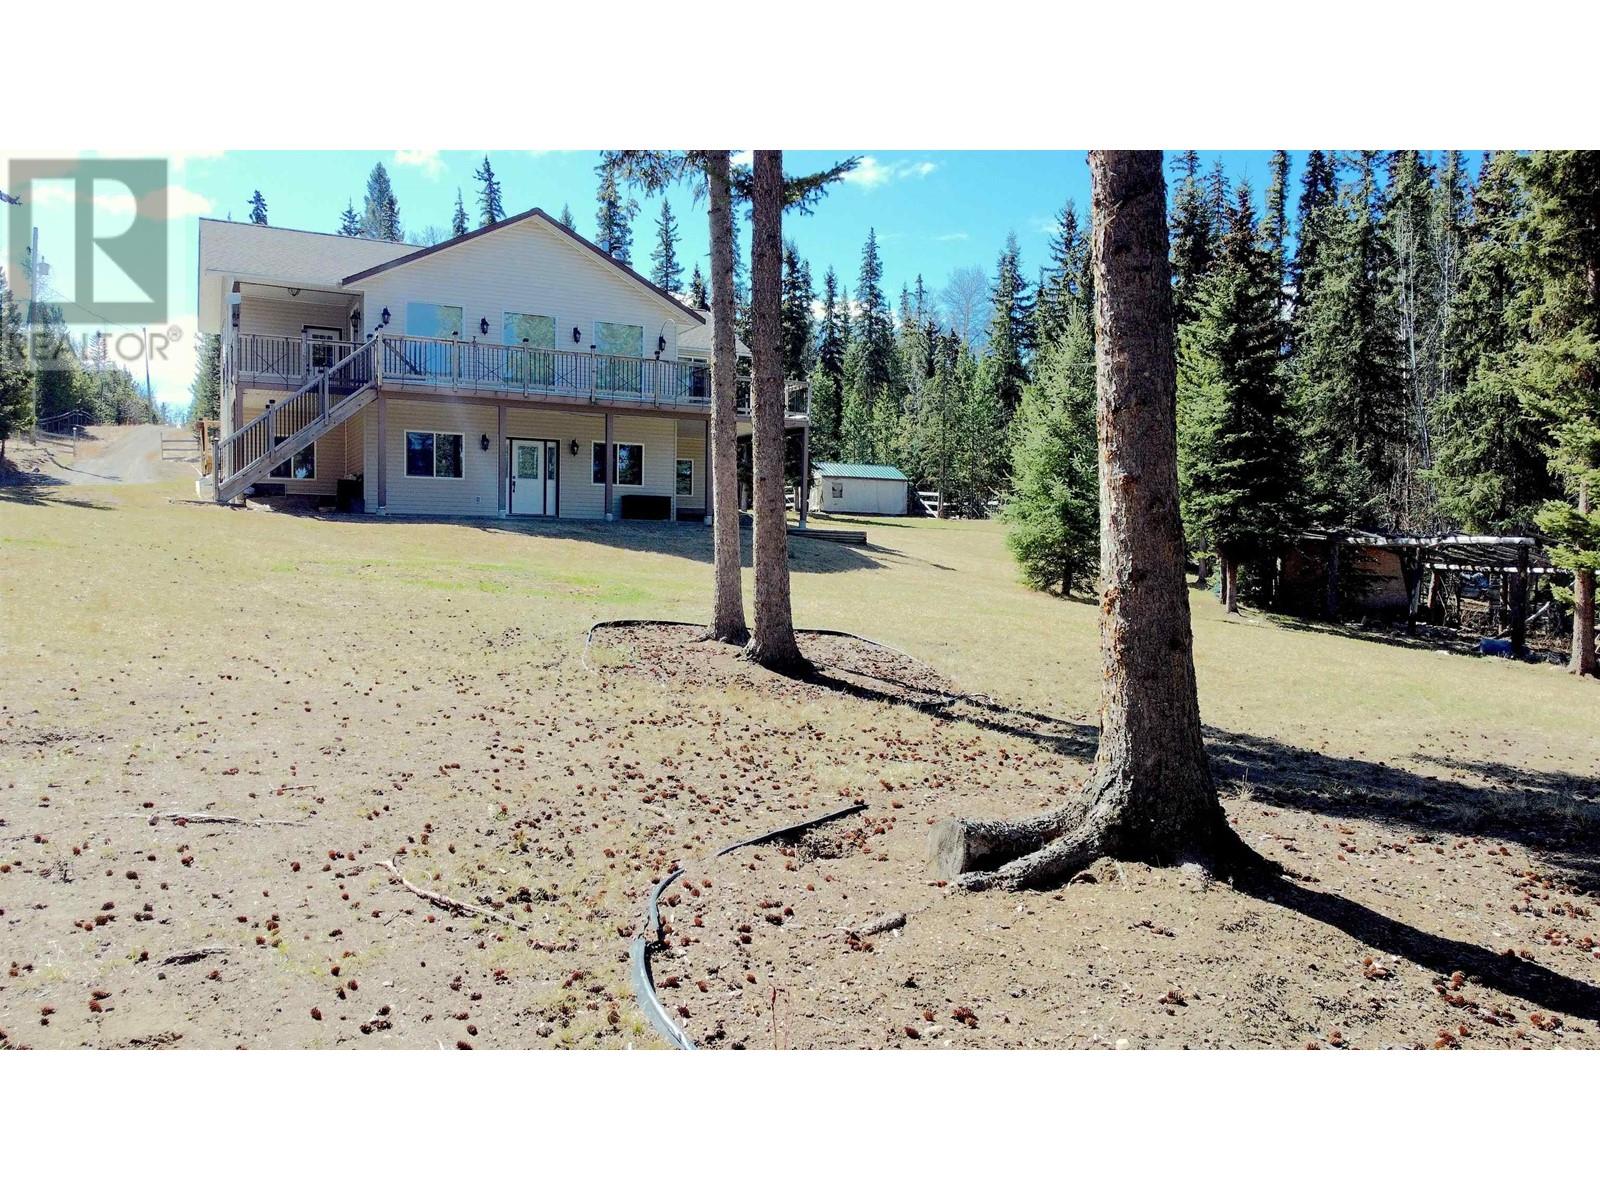 6399 MOOSE POINT DRIVE, 70 mile house, British Columbia